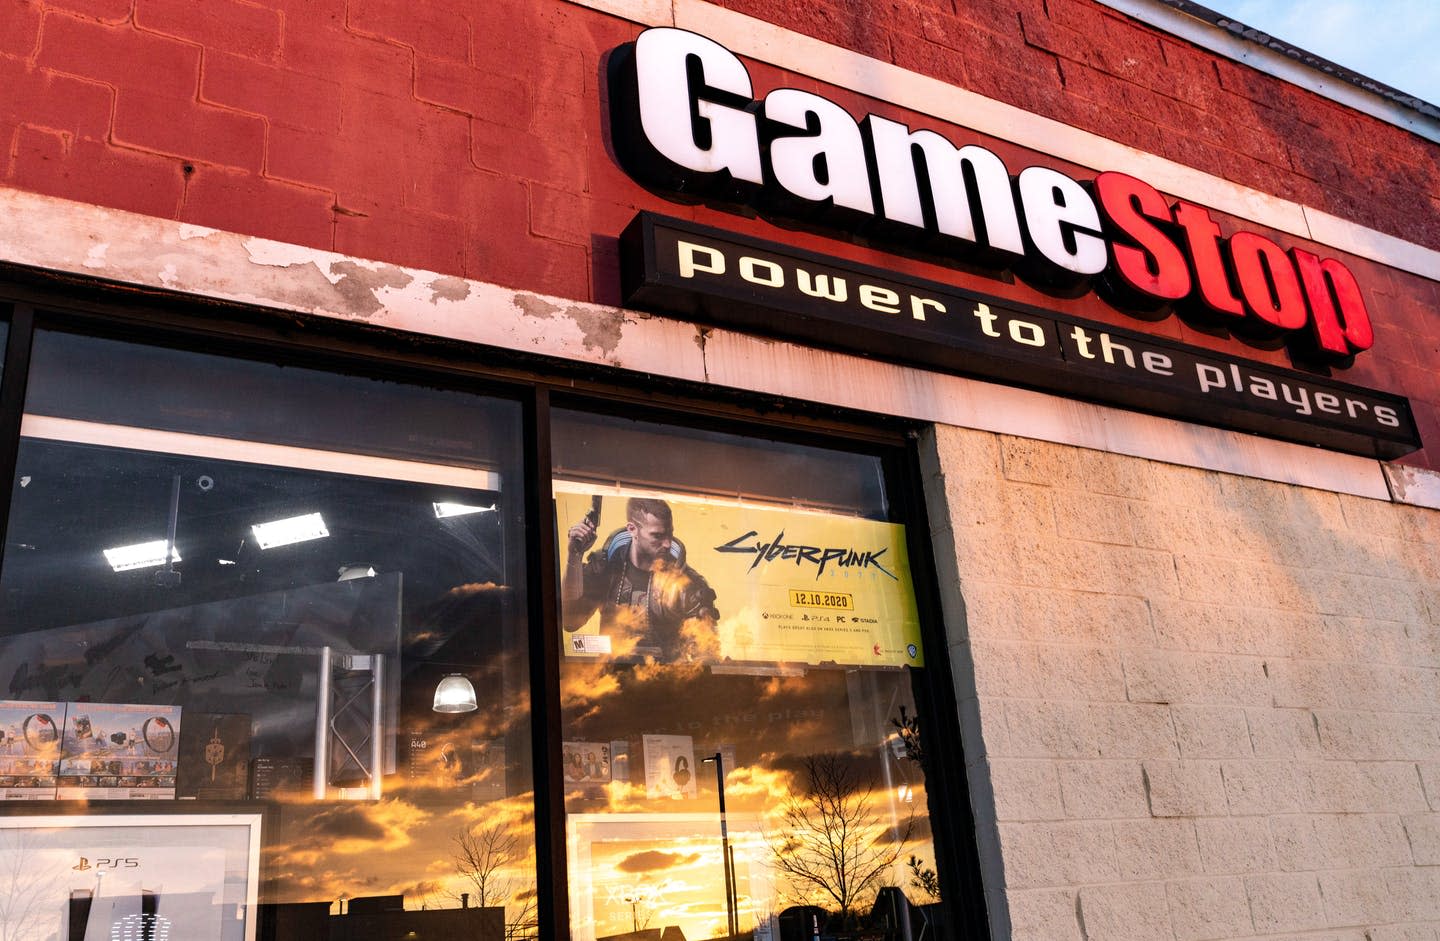 The First Amendment is likely to protect the anonymity of the Redditors who discussed GameStop’s actions